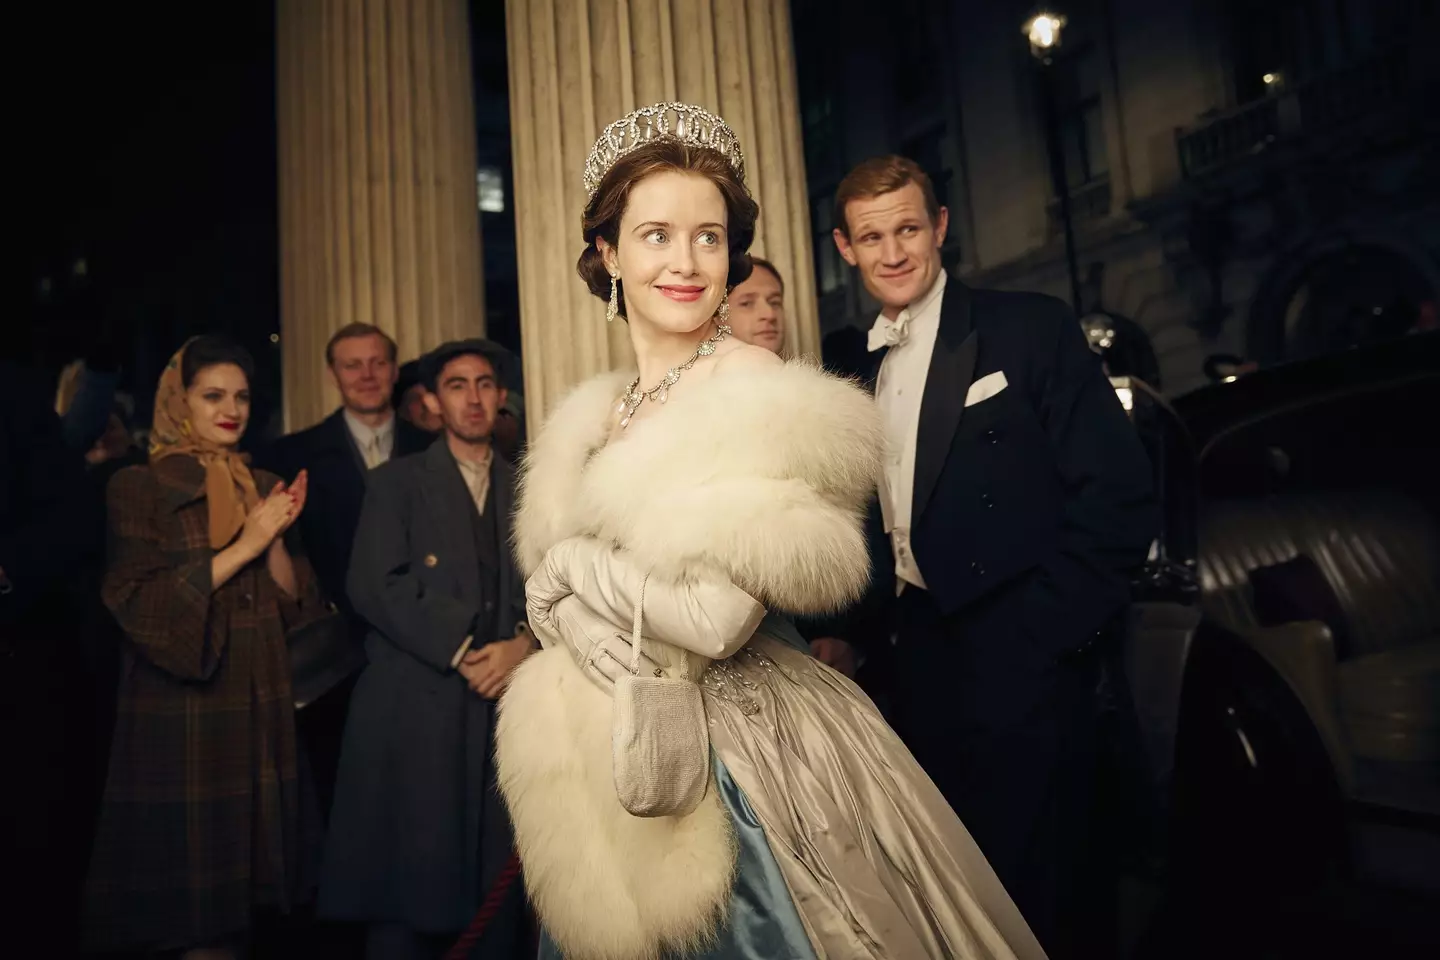 The Crown star Claire Foy has paid tribute to the late Queen Elizabeth.